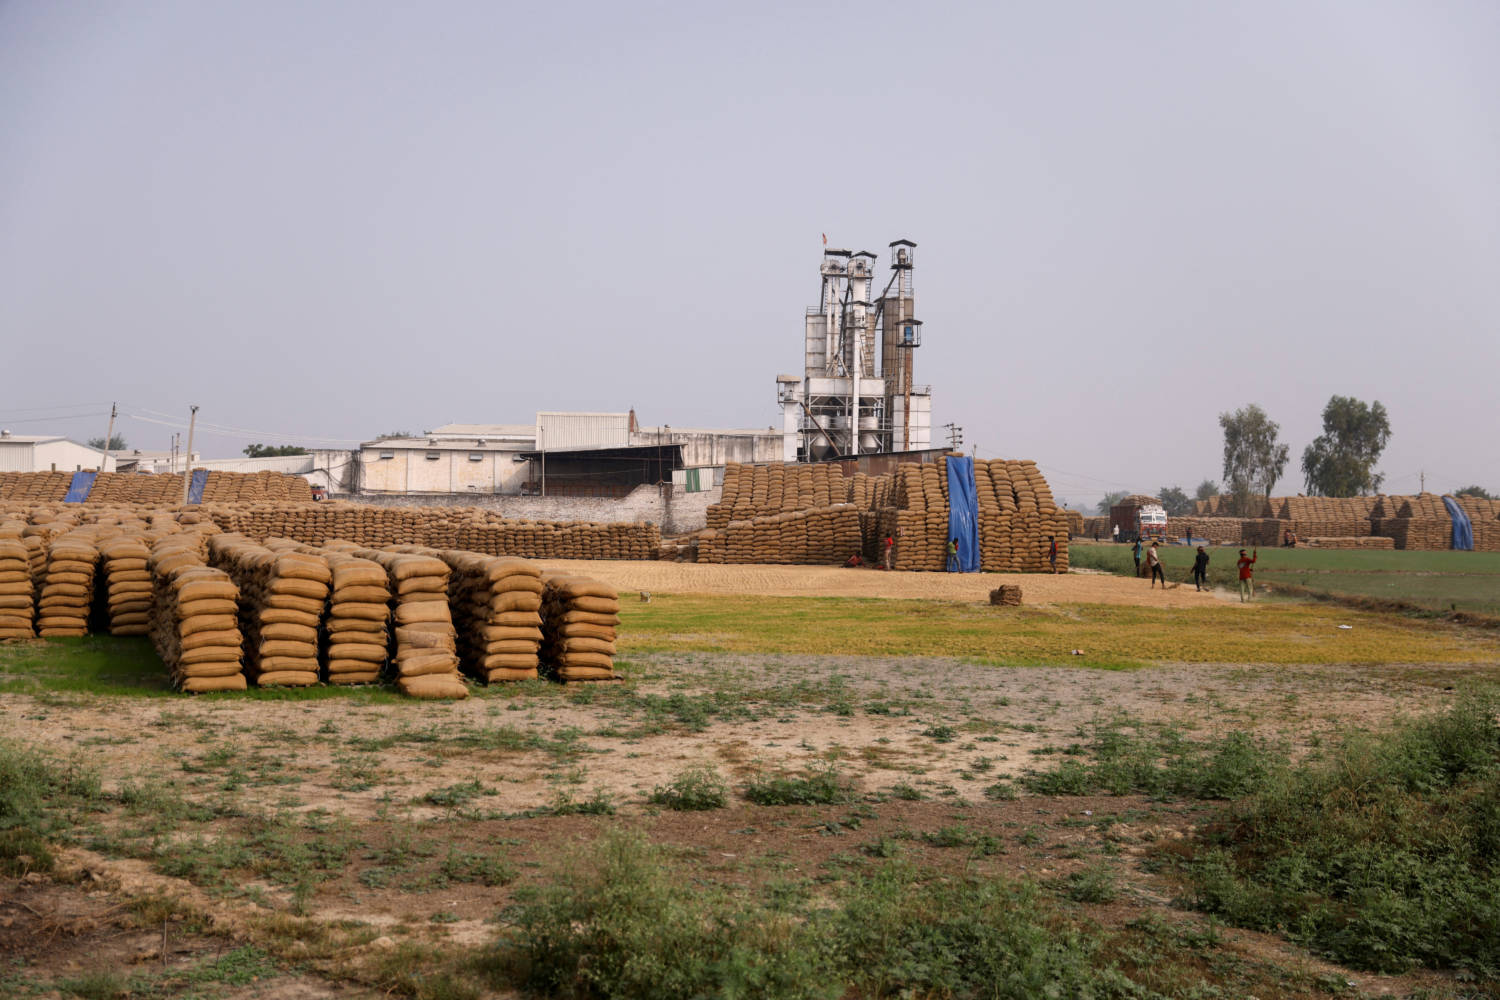 Crops Filled In Jute Sacks Are Seen Stacked Up On A Field In A Village In Karnal District In The Northern State Of Haryana